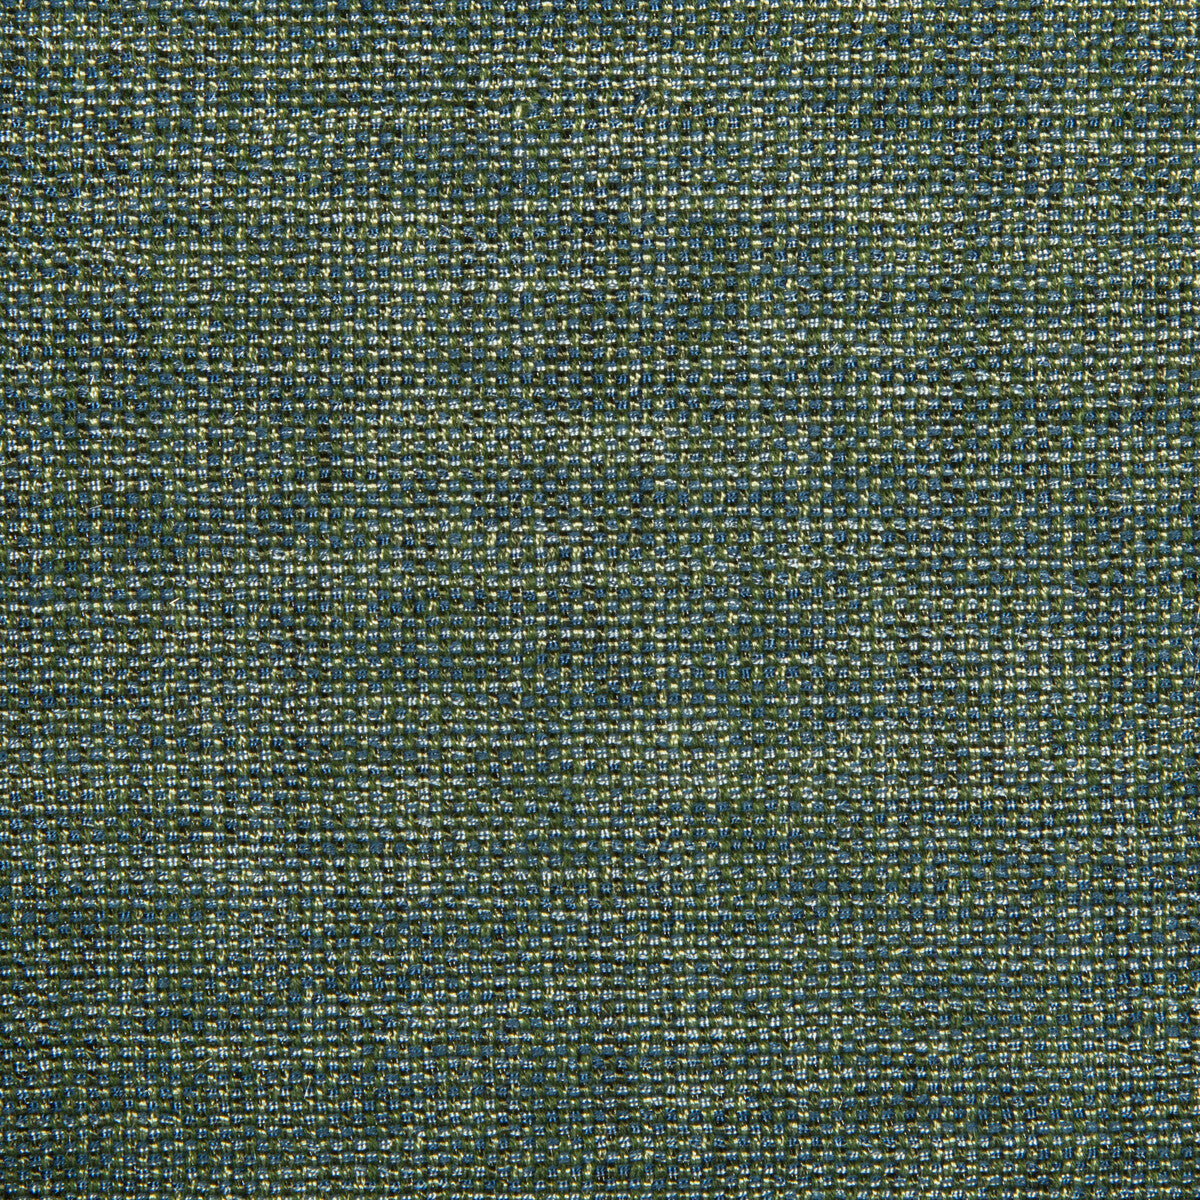 Kravet Contract fabric in 34926-315 color - pattern 34926.315.0 - by Kravet Contract